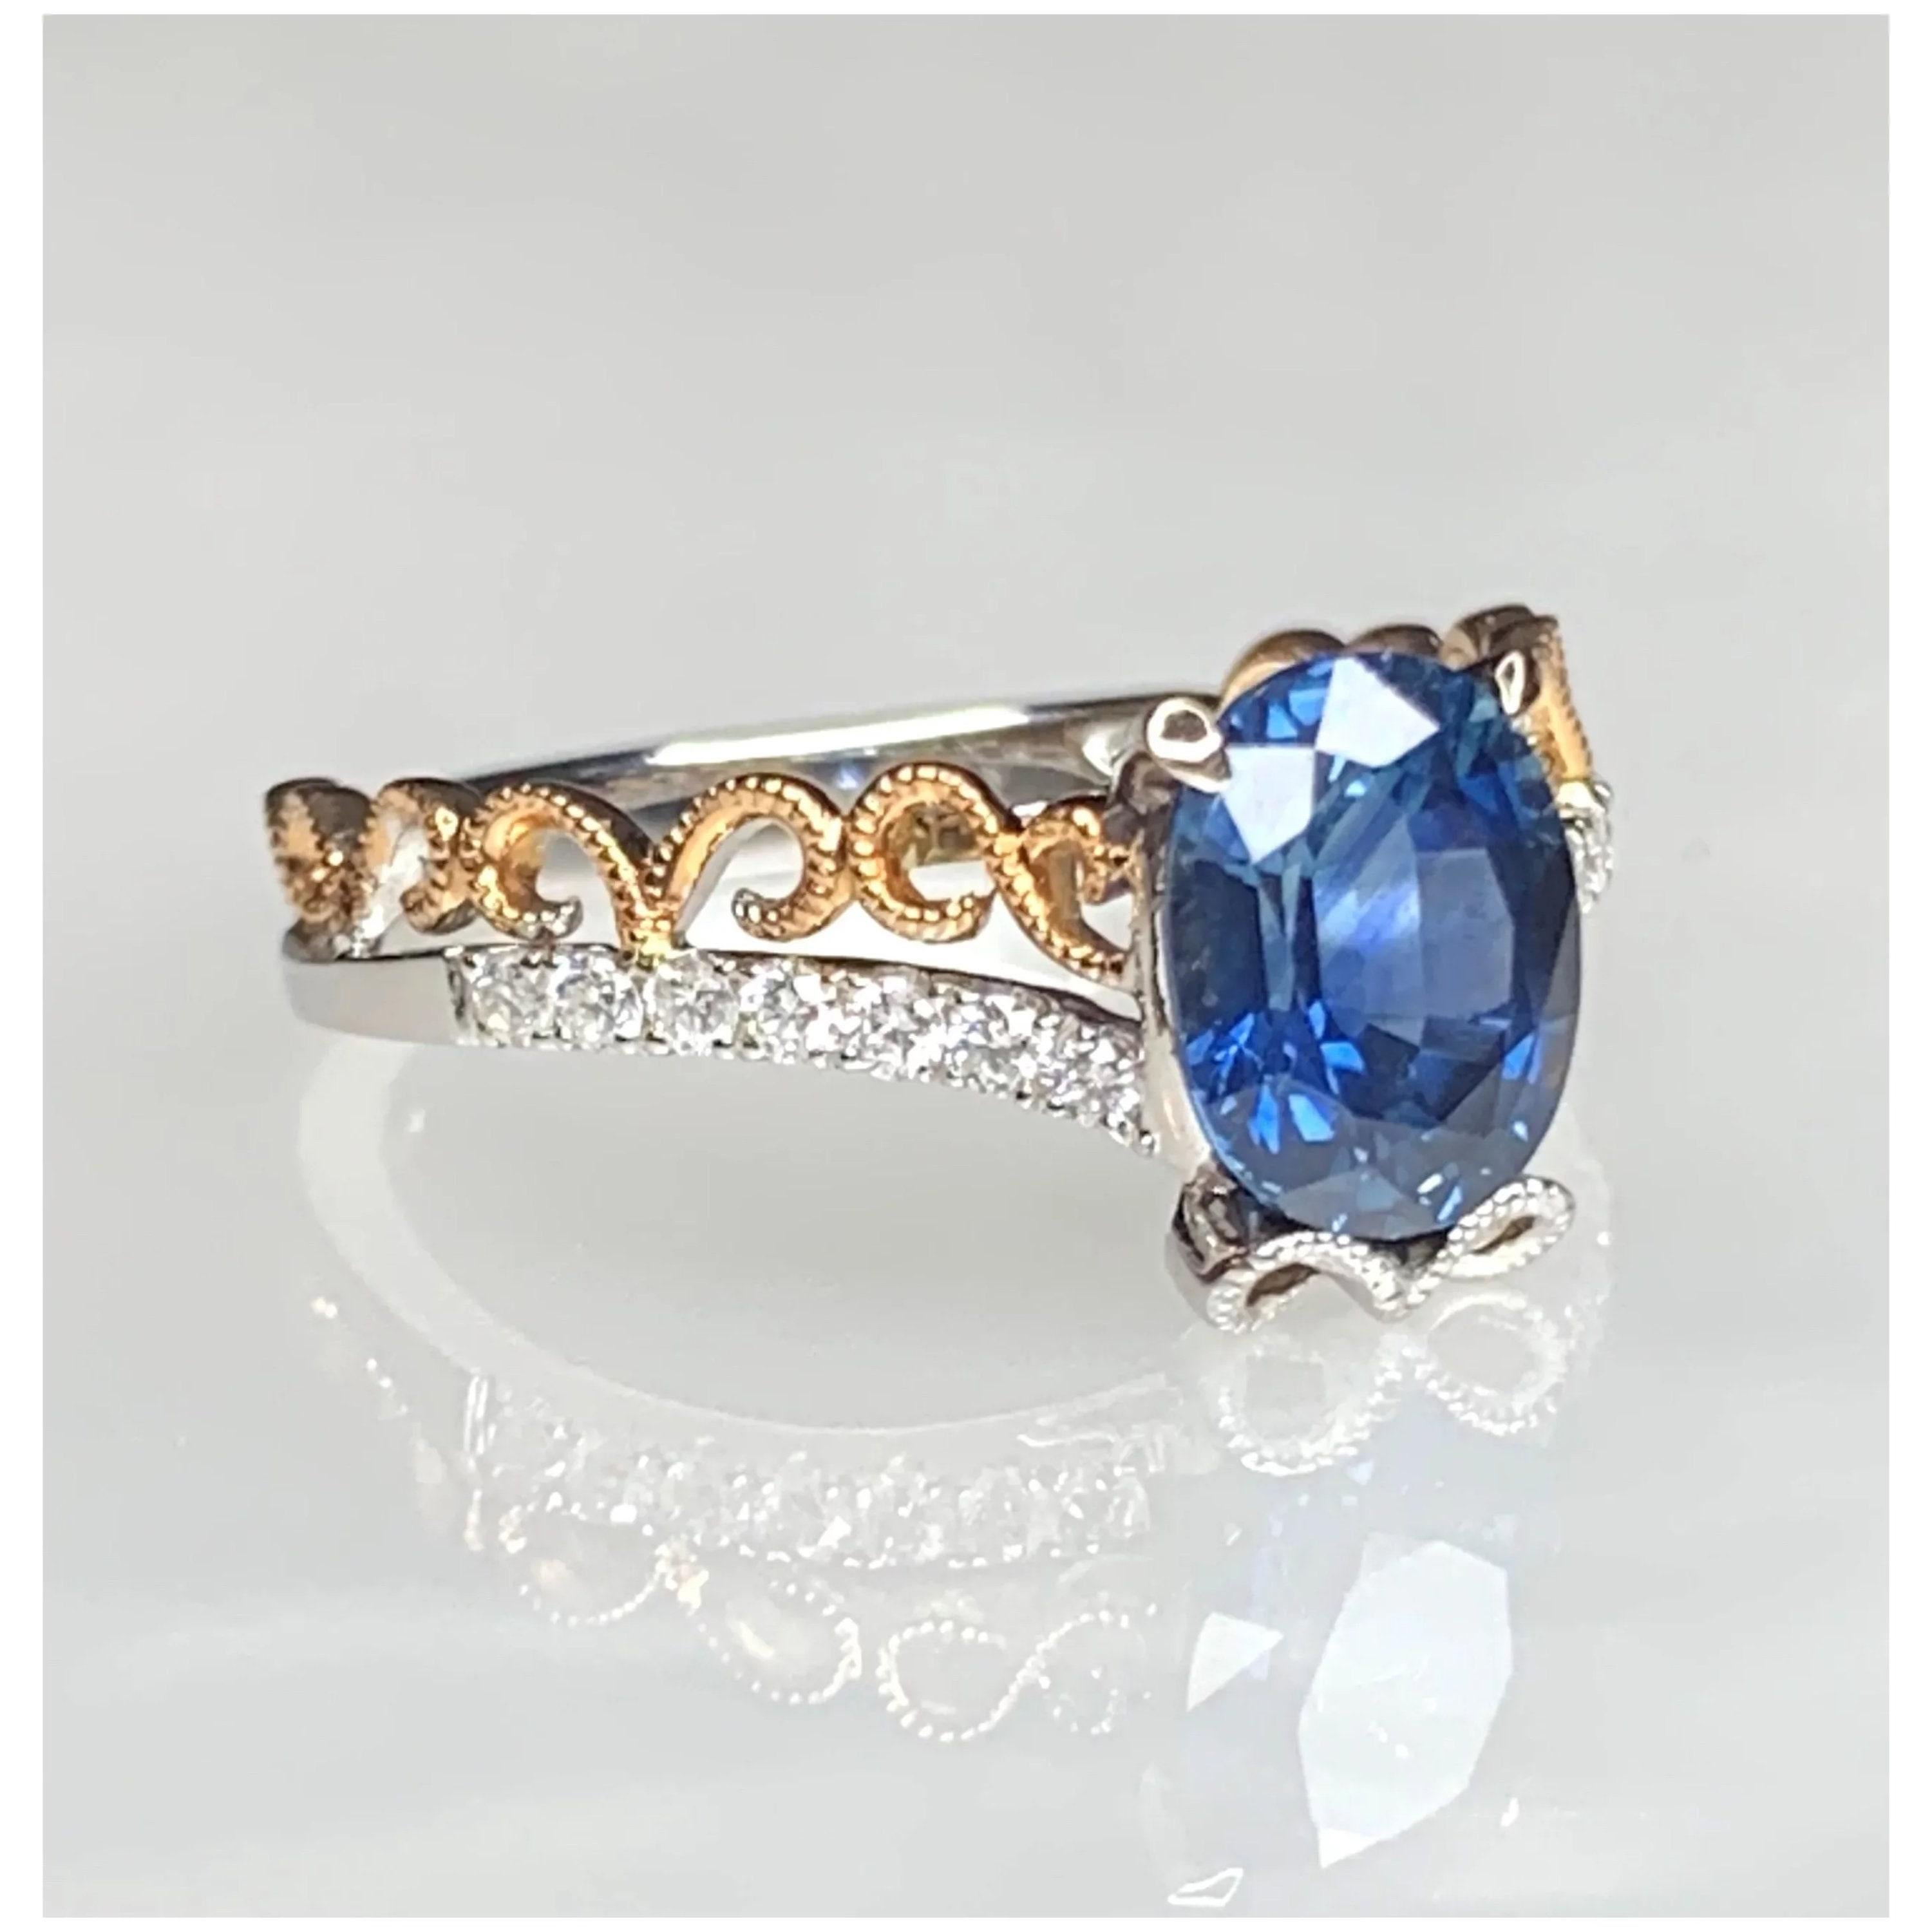 For Sale:  Oval Cut Blue Sapphire Diamond Engagement Ring Art Deco Sapphire Bridal Ring  5